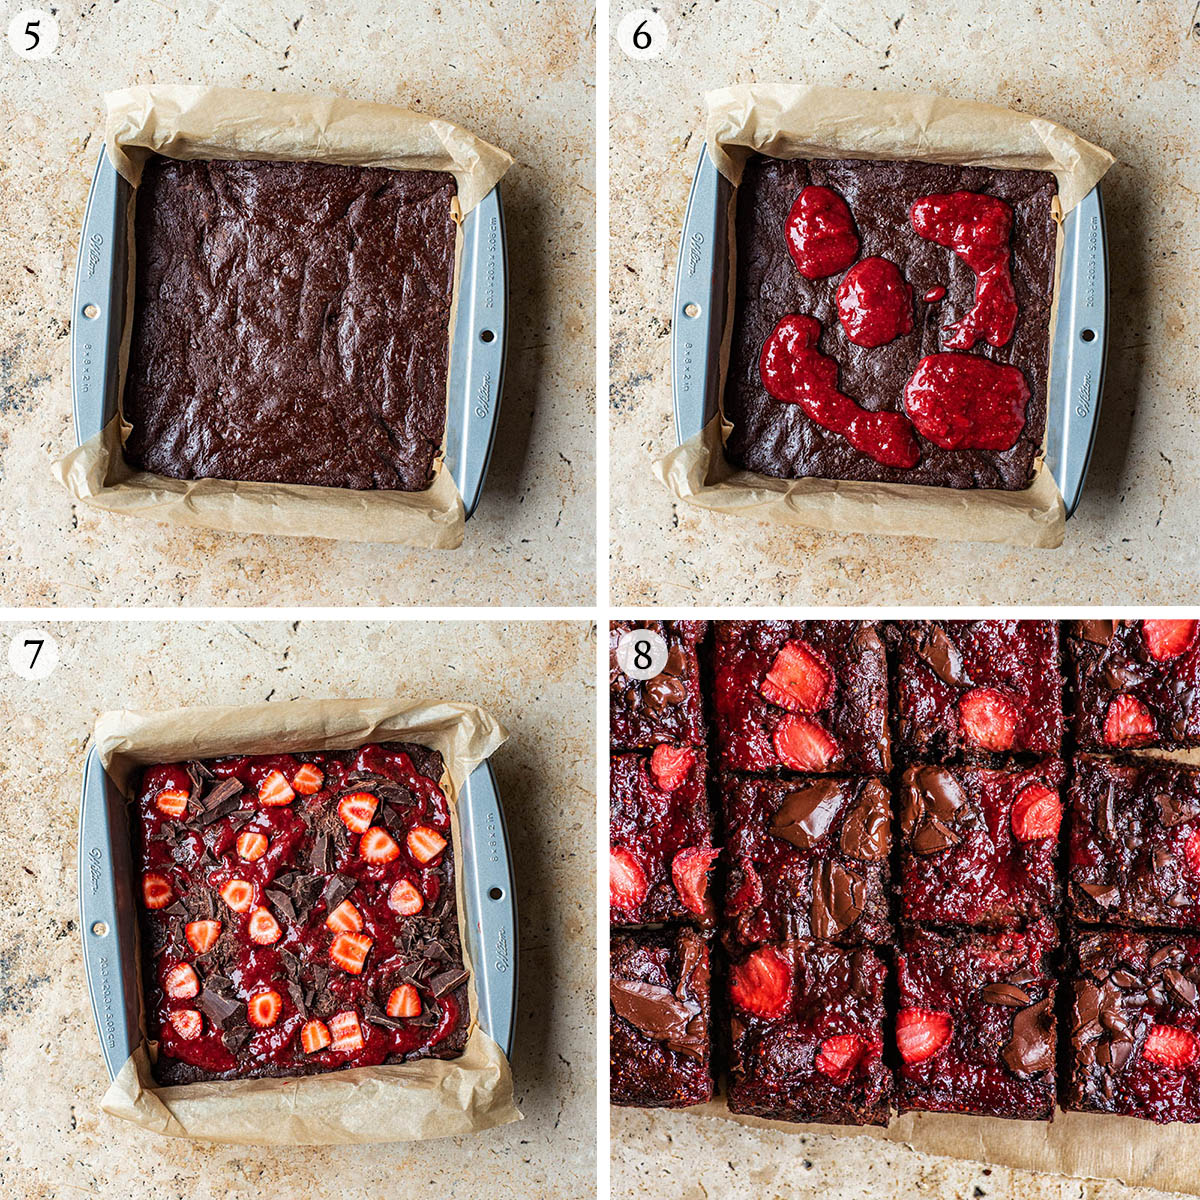 Strawberry brownies steps 5 to 8.